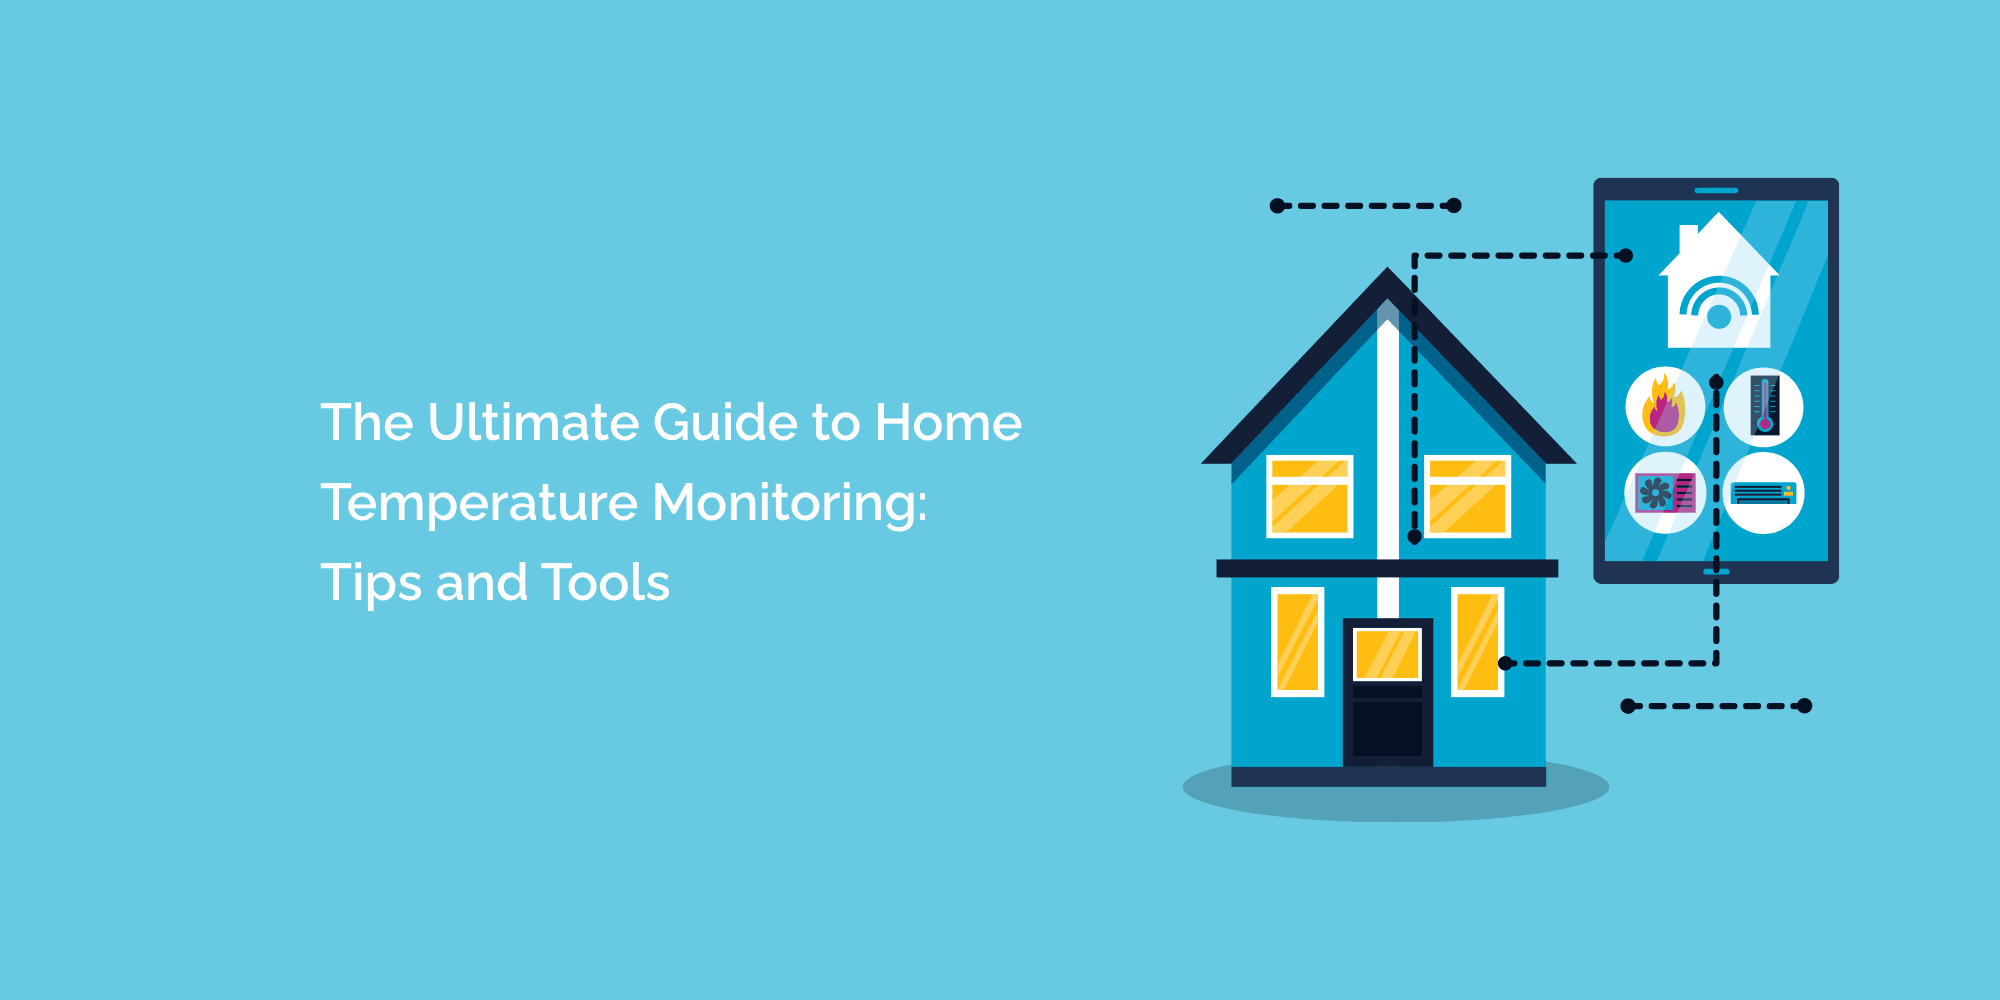 The Ultimate Guide to Home Temperature Monitoring: Tips and Tools